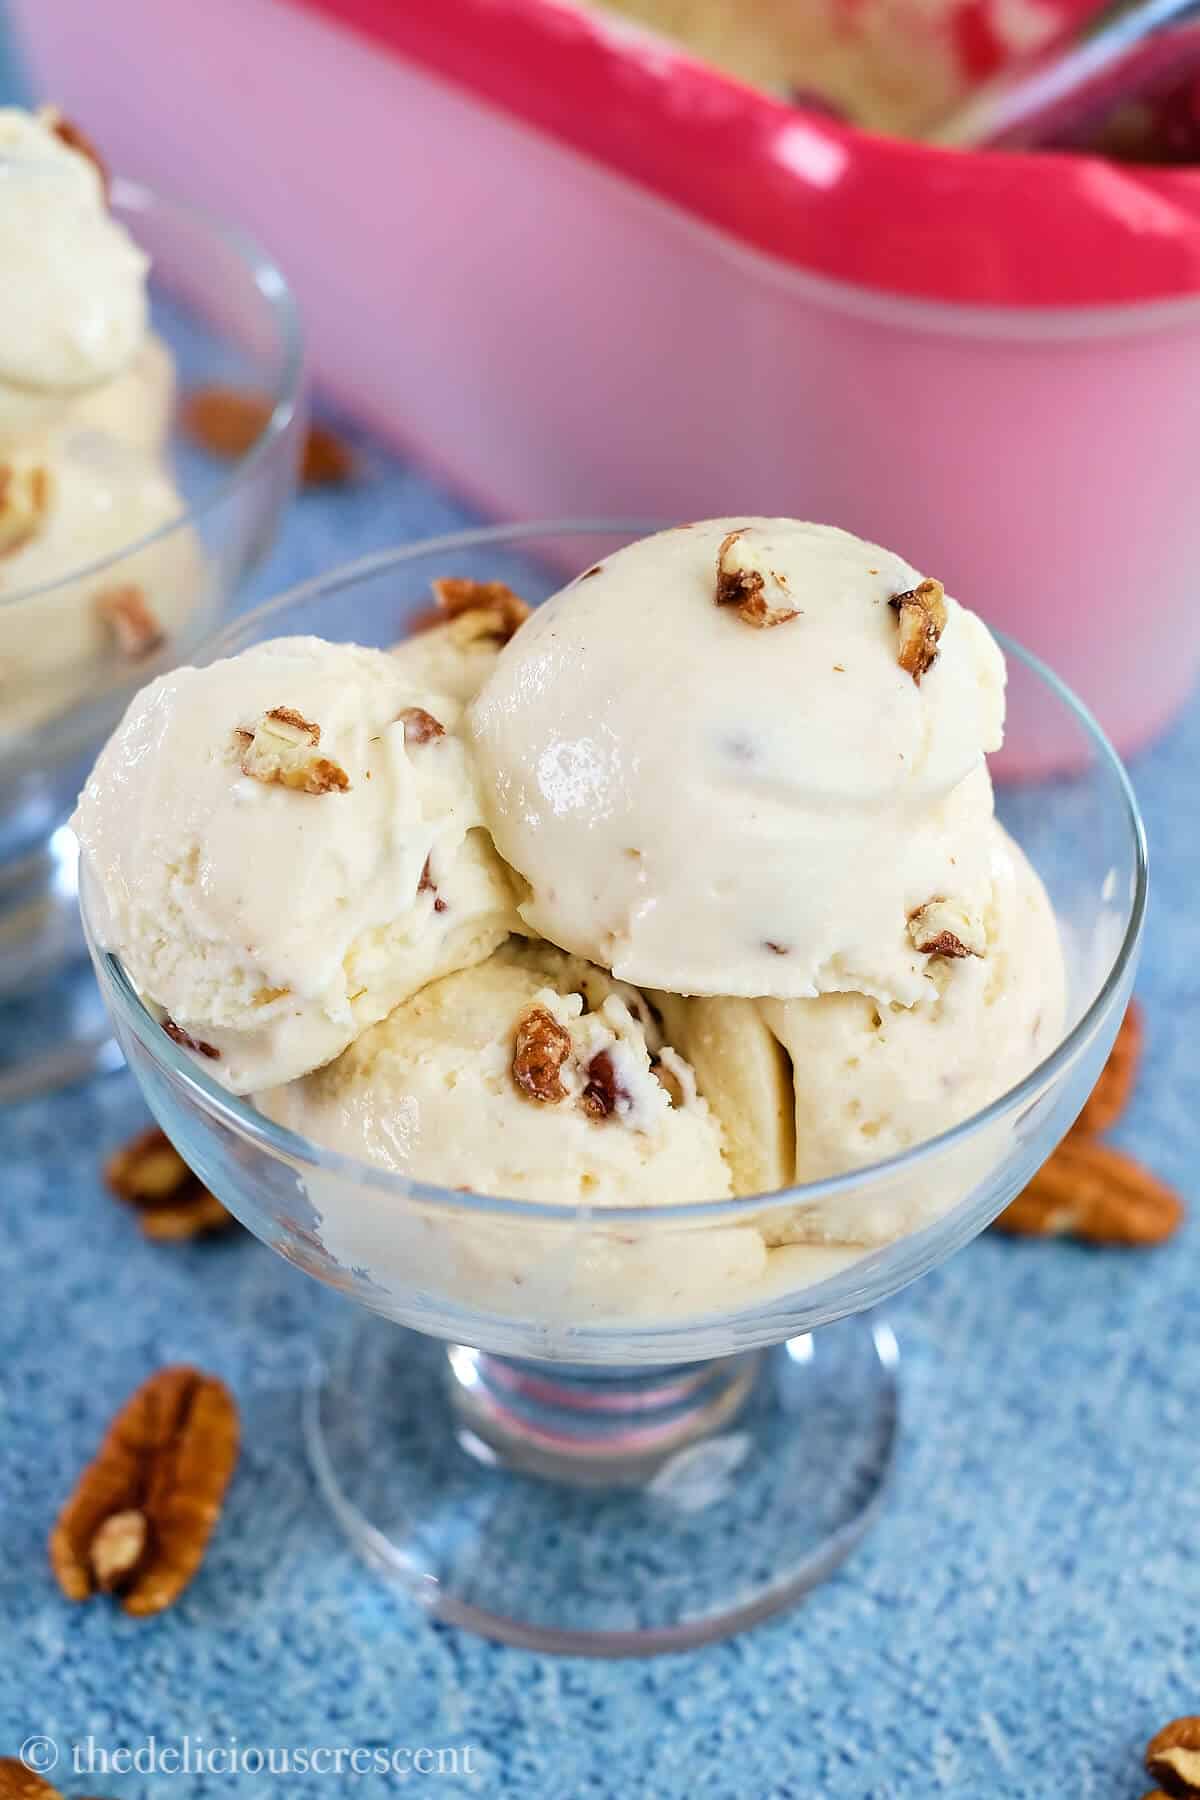 Maple pecan ice cream in a glass bowl.